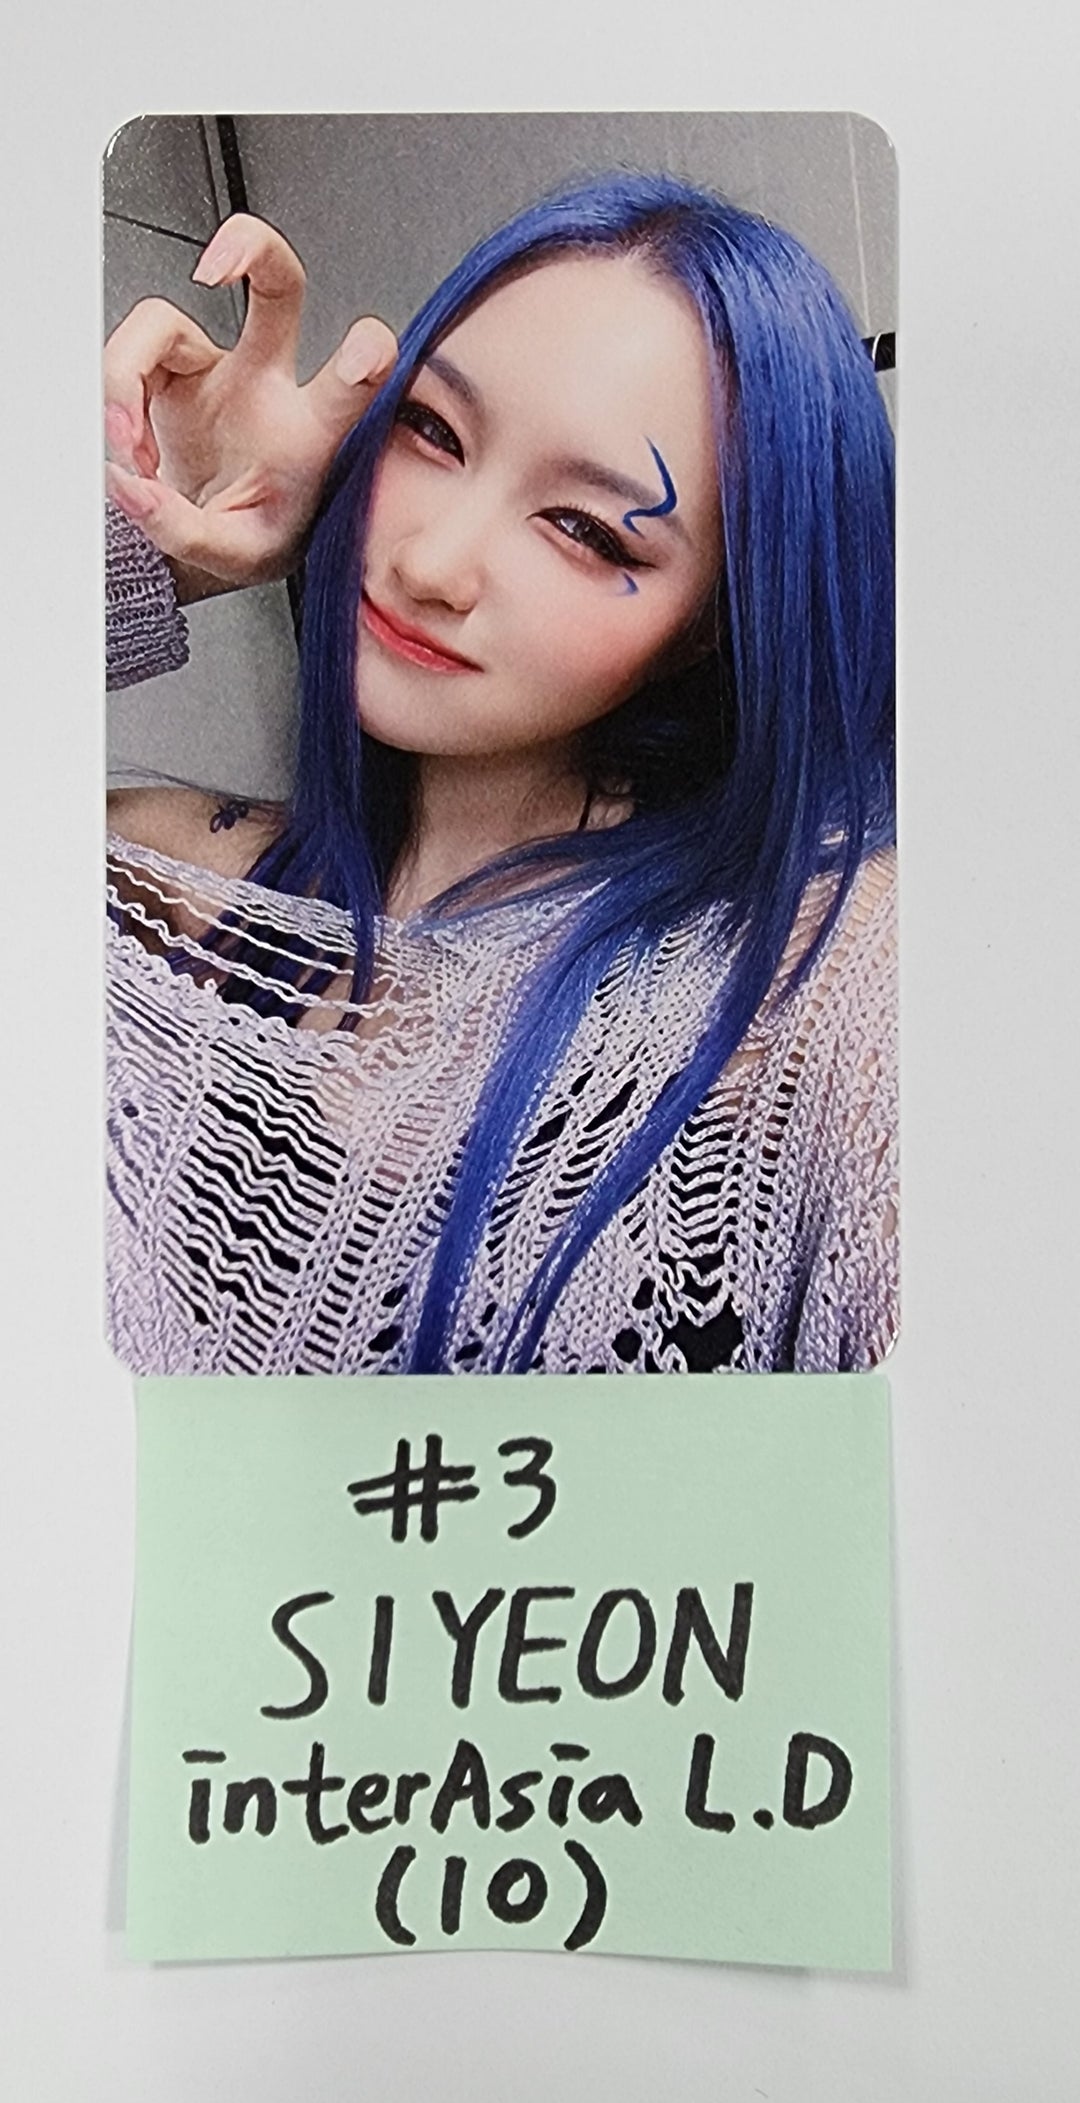 Dreamcatcher - "Apocalypse : From us" - Interasia Lucky Draw Event Photocard